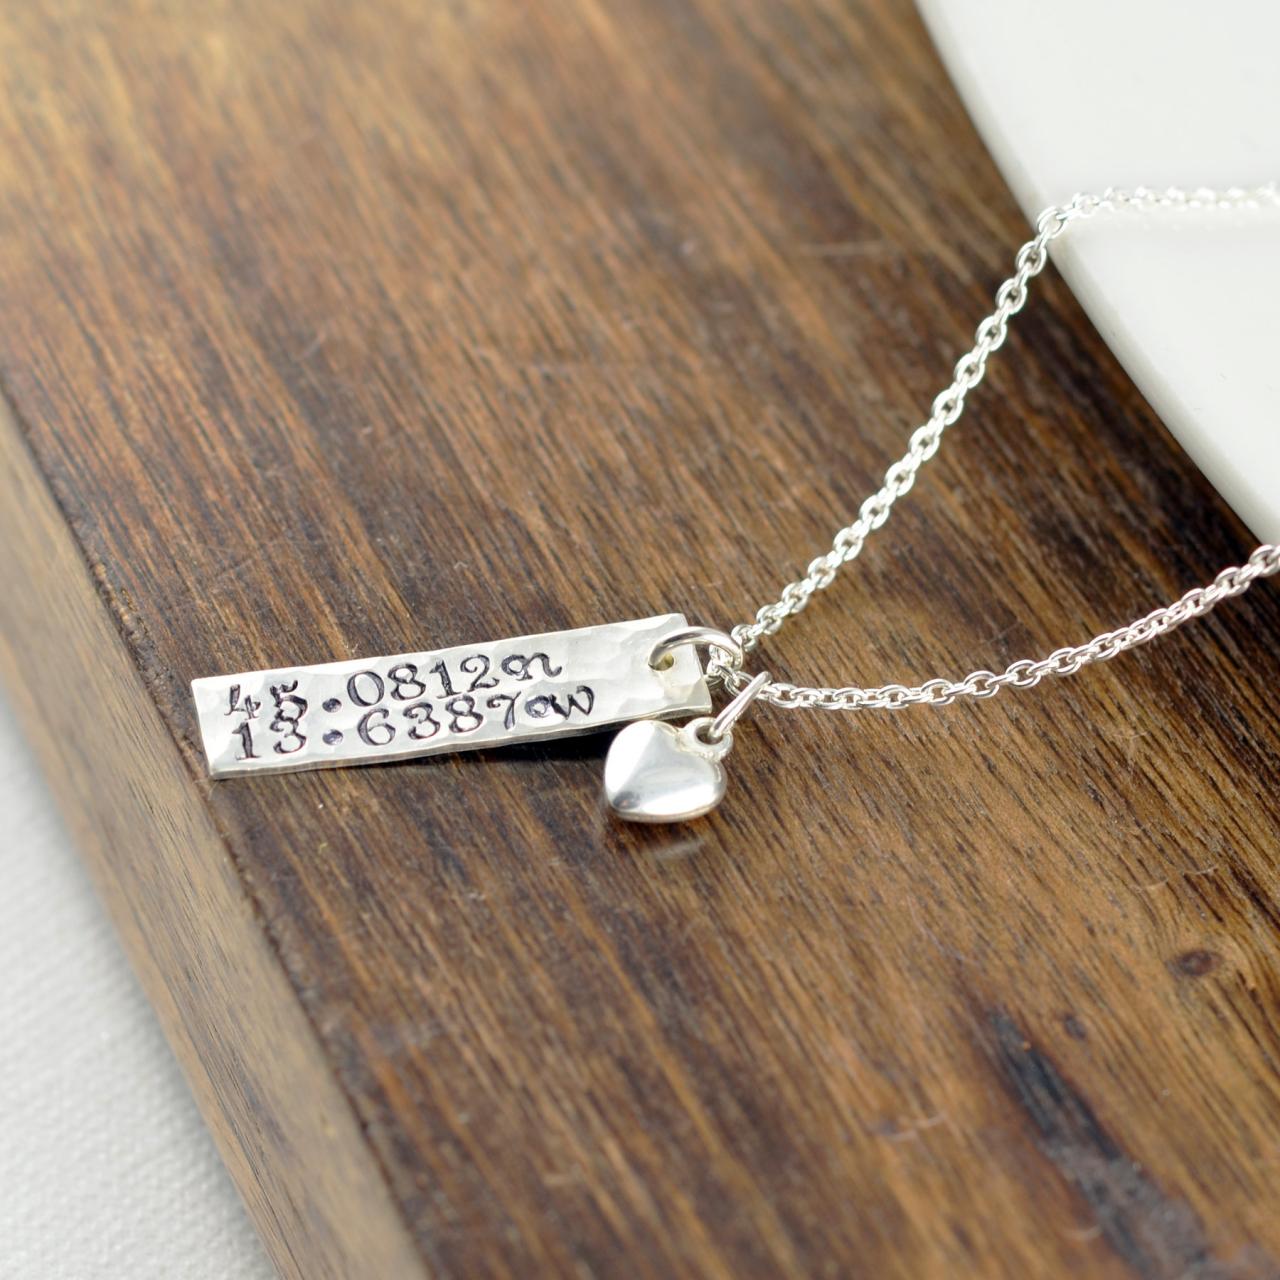 Womens Gift, Coordinate Necklace, Latitude Longitude Necklace, Custom Coordinates, Coordinate Jewelry, Hand Stamped Necklace, Compass Charm